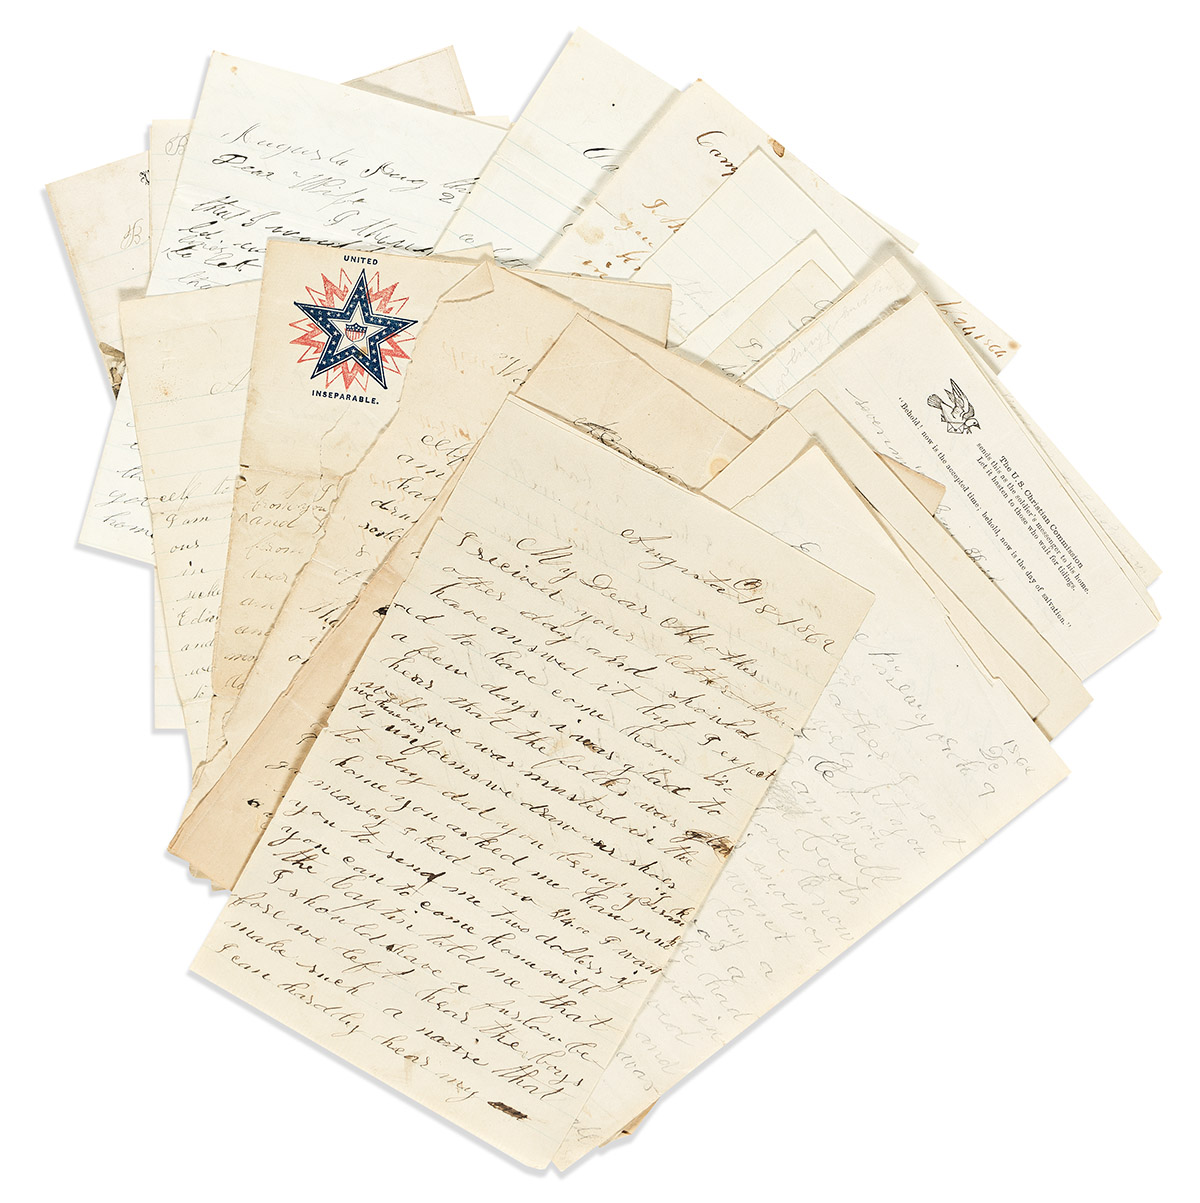 (CIVIL WAR.) Group of Civil War letters and papers from various regiments.